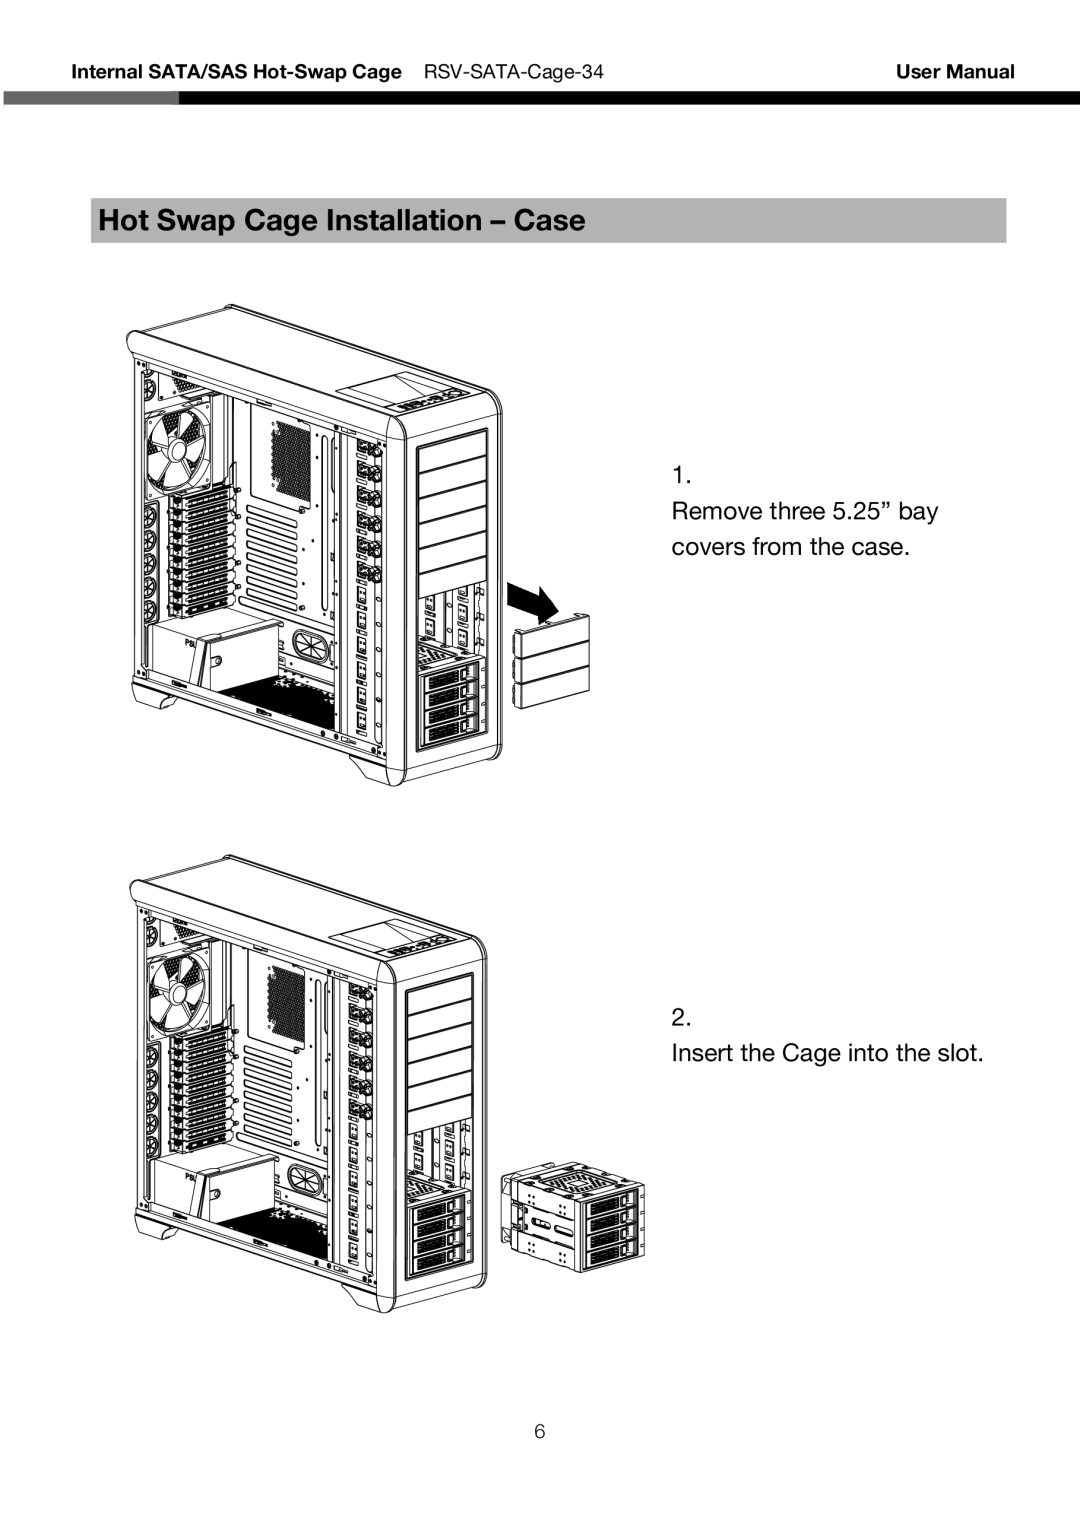 Rosewill RSV-SATA-Cage-34 user manual Hot Swap Cage Installation - Case, Remove three 5.25” bay covers from the case 